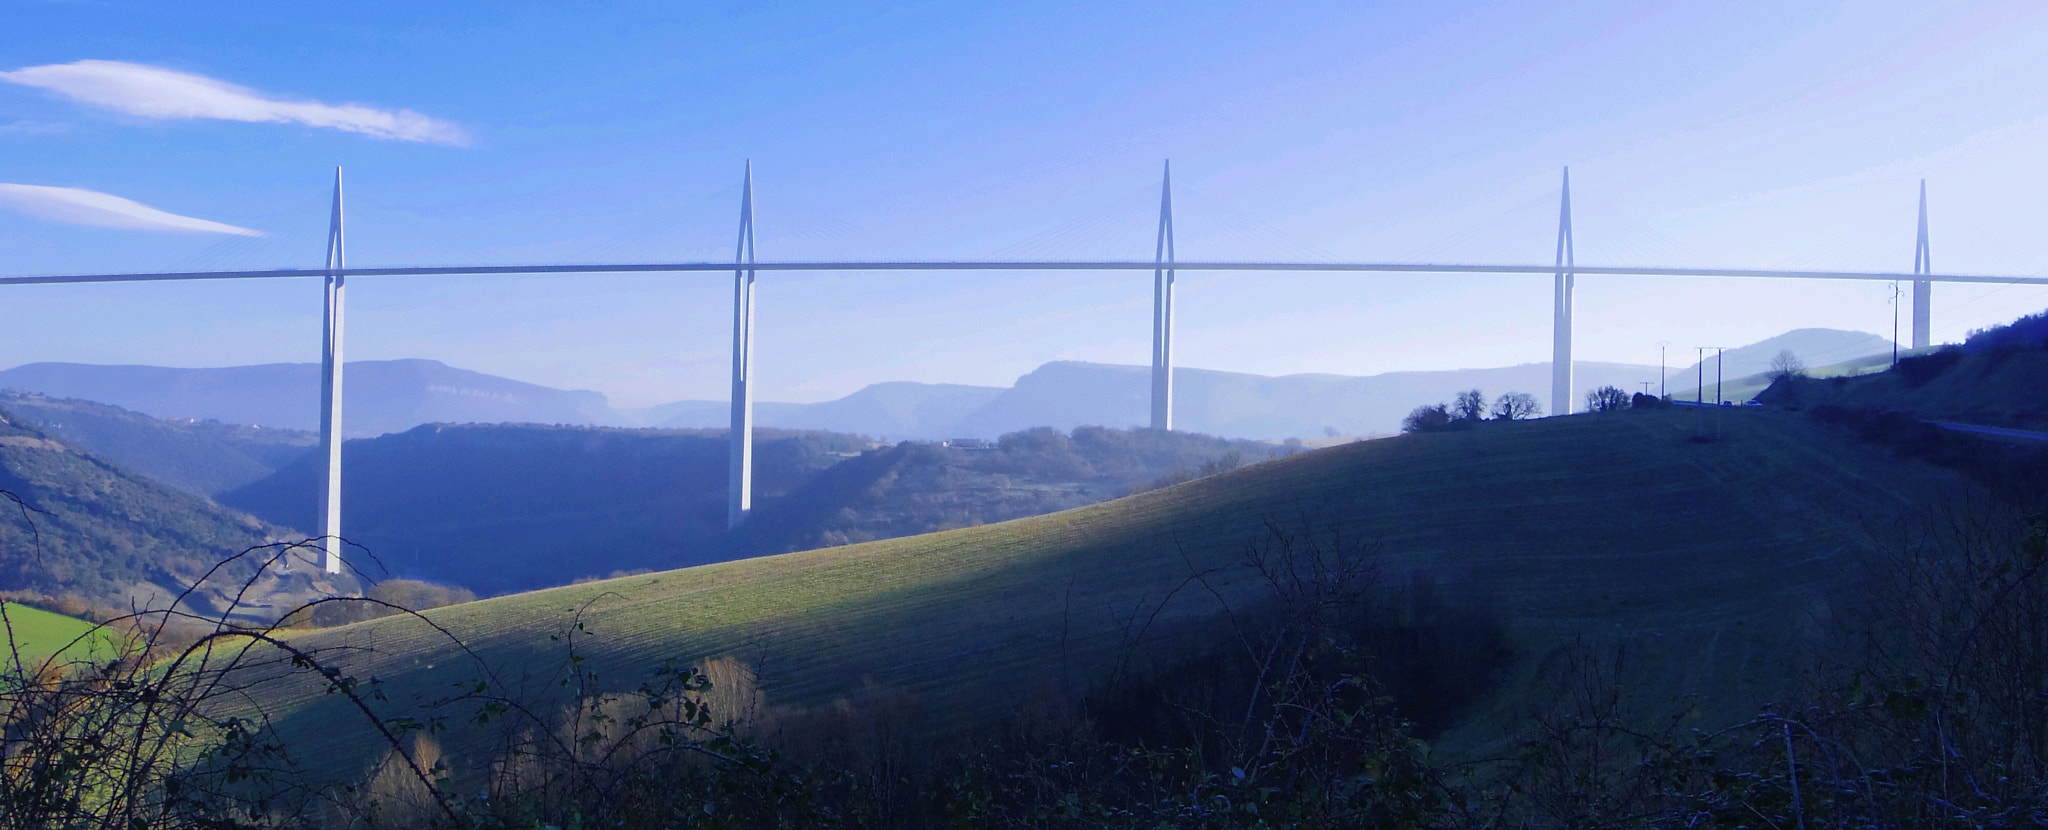 Pentax Q sample photo. Viaduct millau in the south of france photography